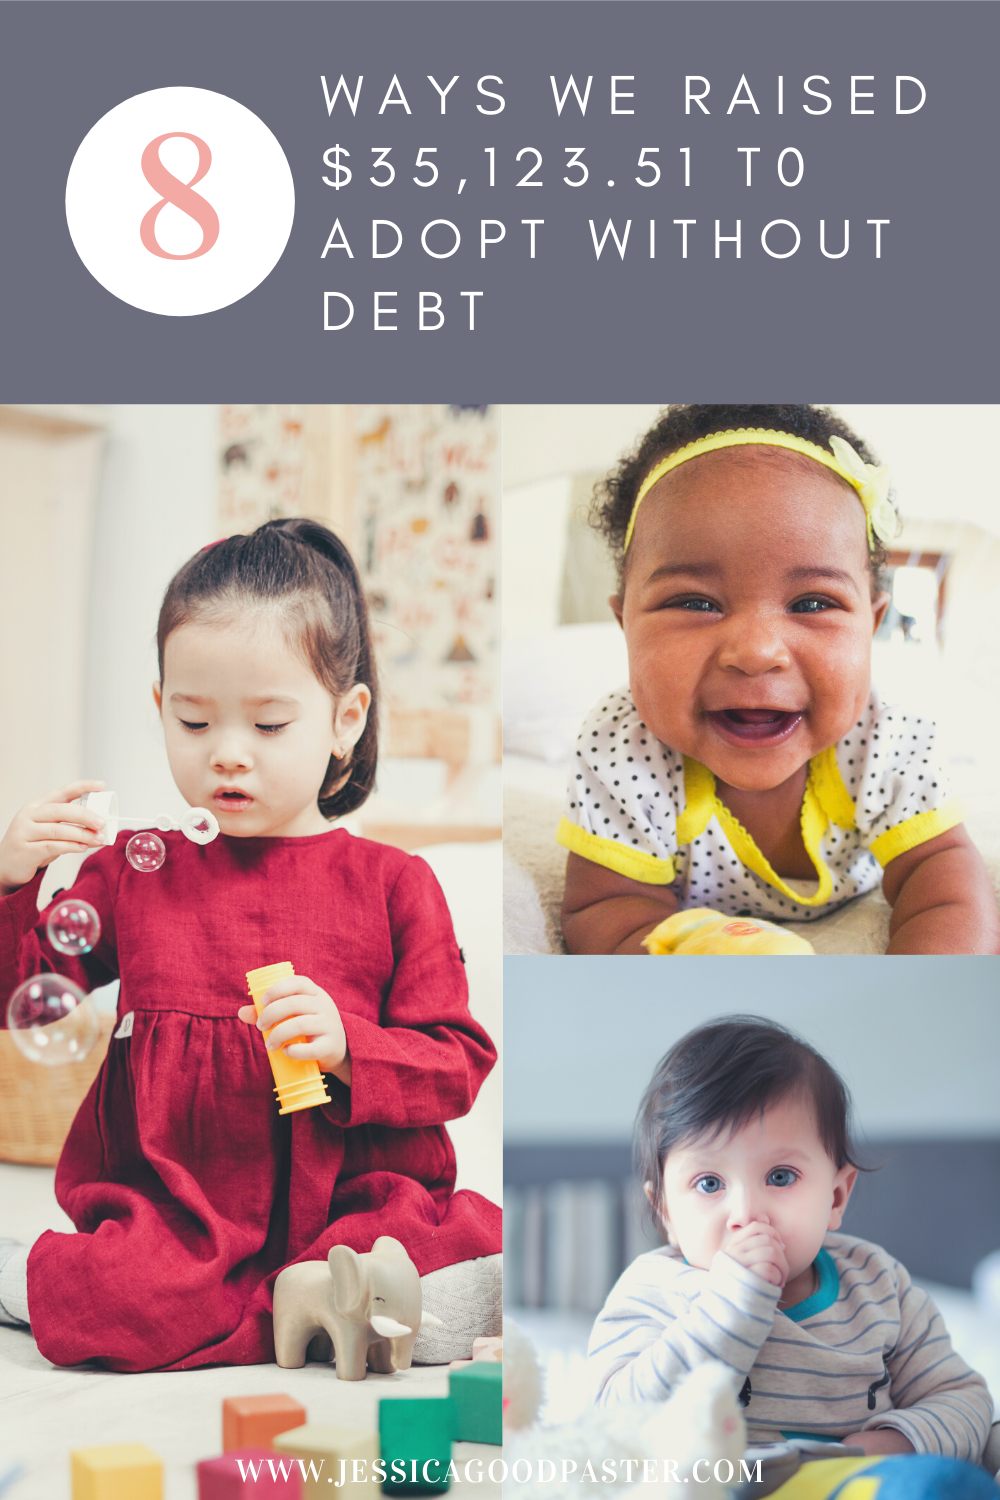 8 Ways We Raised $35,123.51 for Our Adoption Without Debt | How we raised money for our international adoption from China by fundraising, adoption grants, saving, and spending less. Plus, ideas for how you can fund your adoption. #adoption #parenting #fundraising